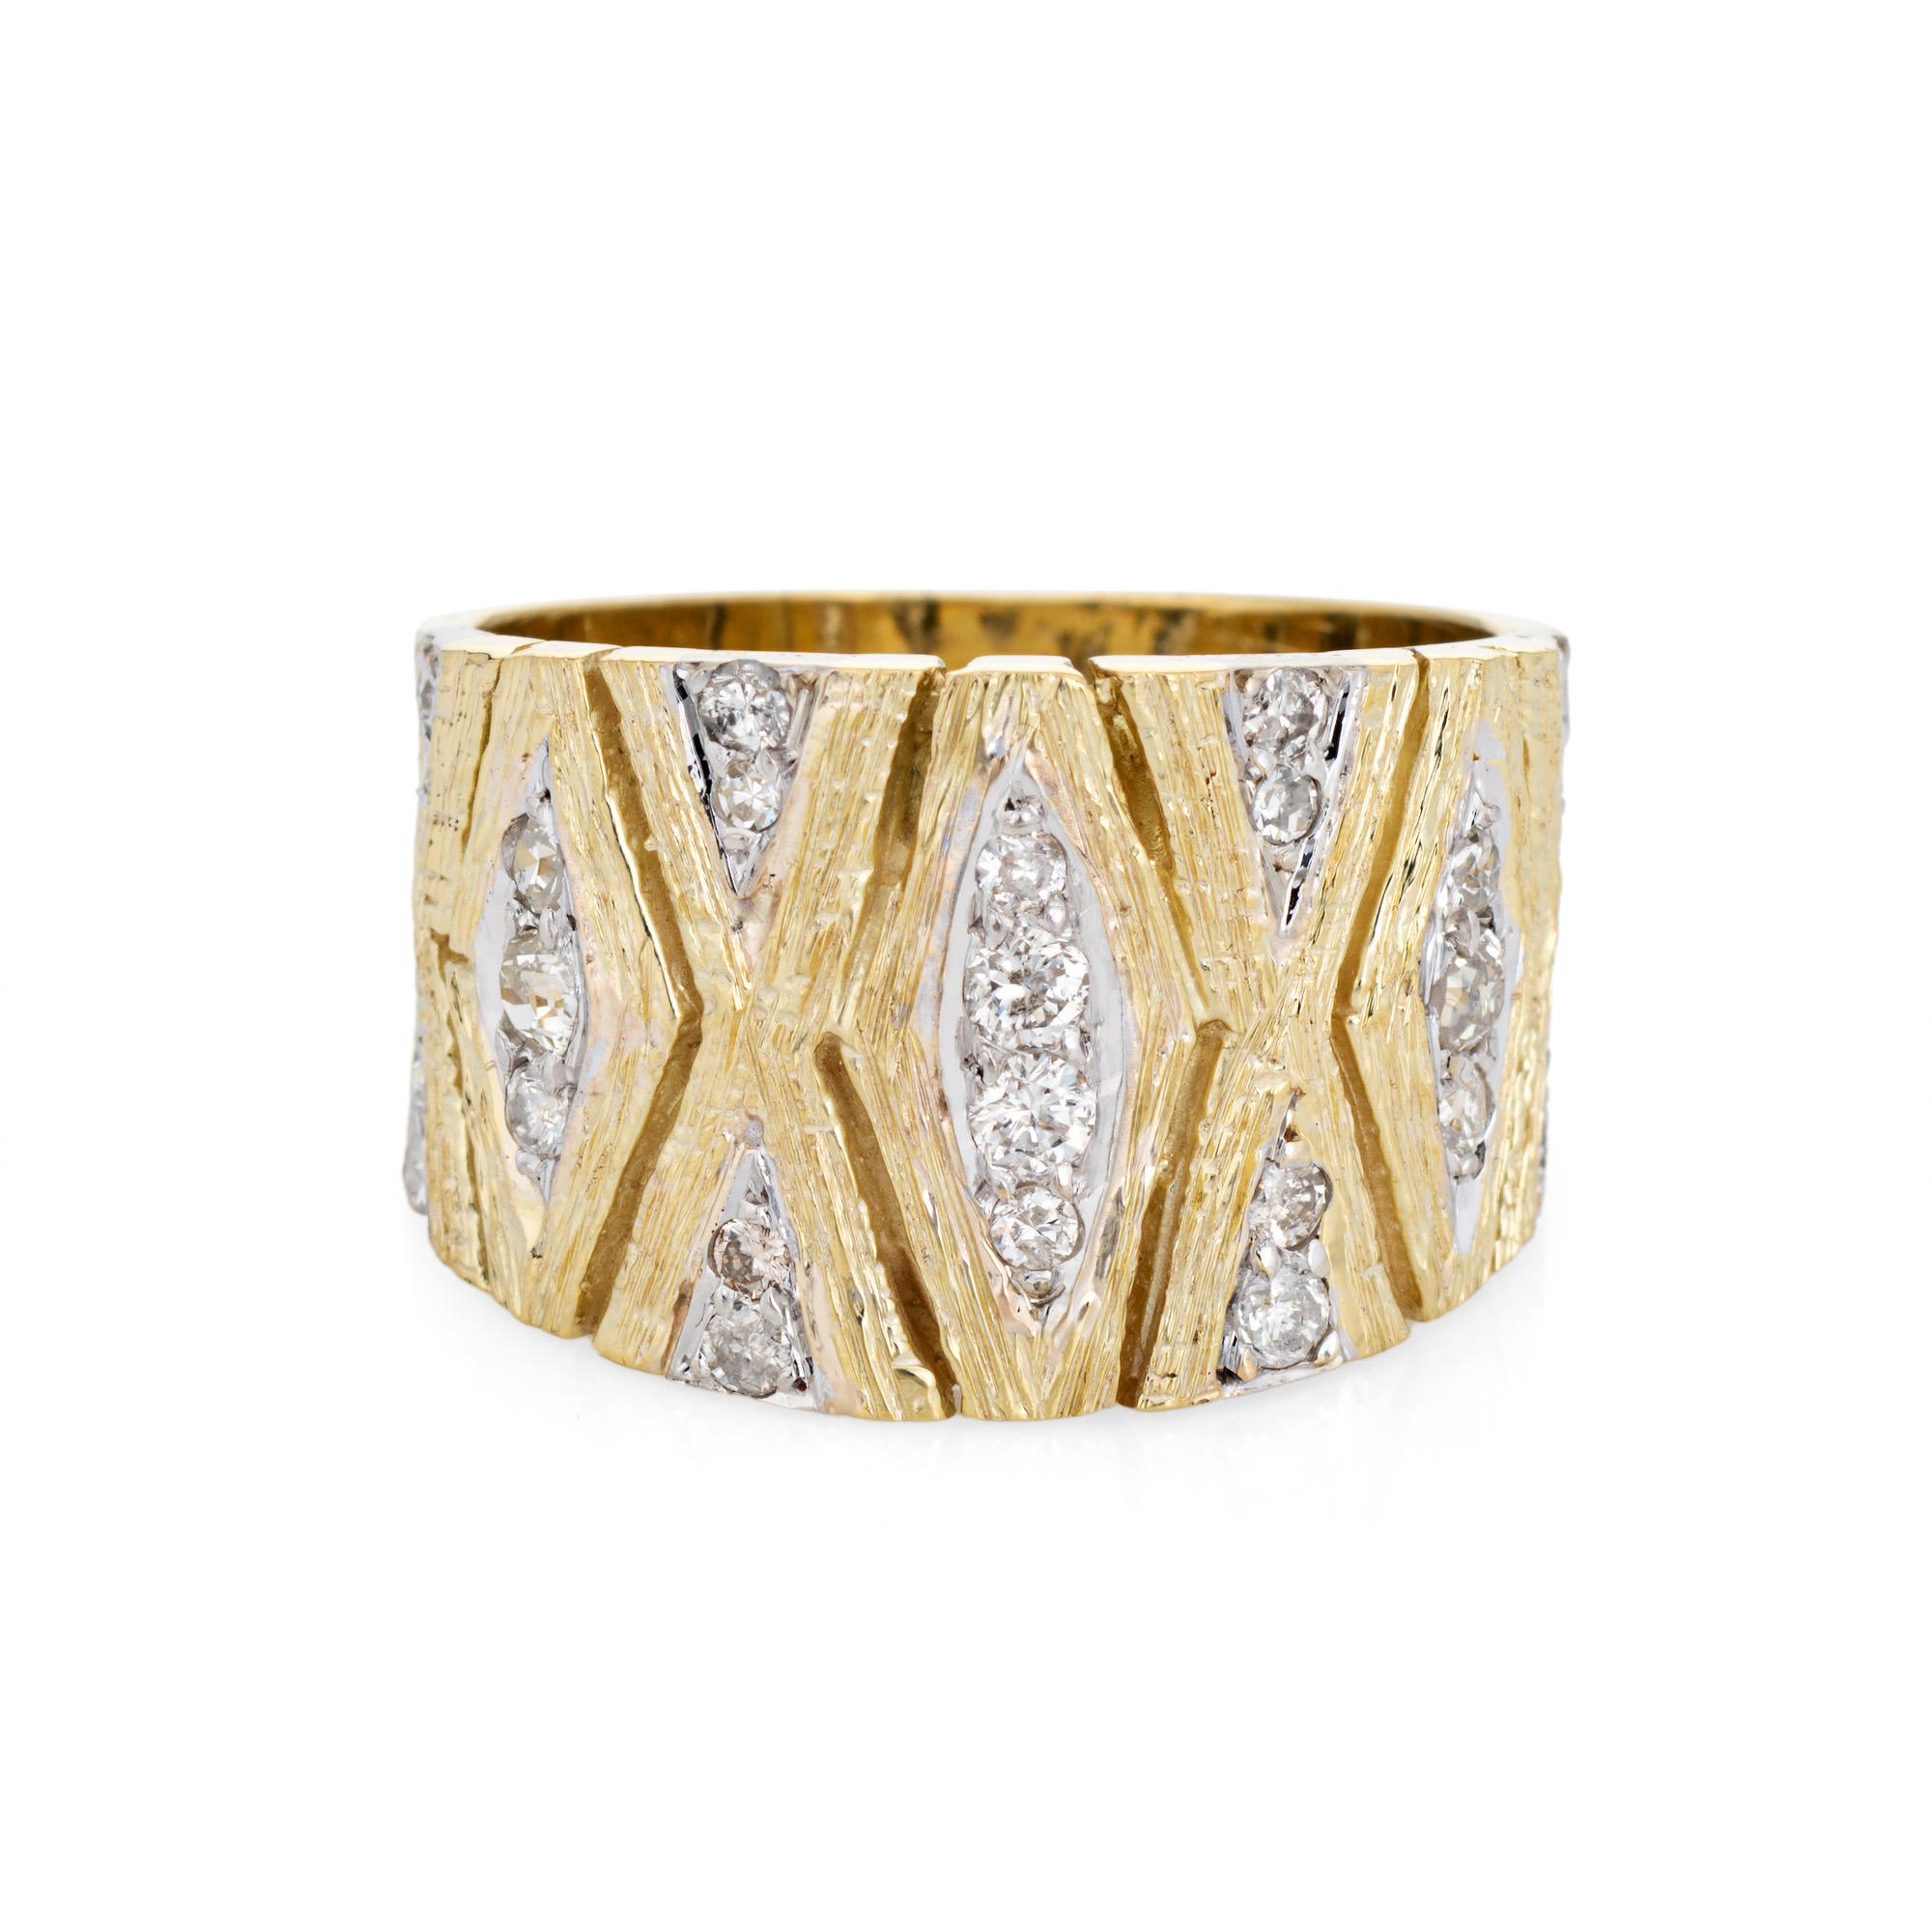 Stylish vintage diamond cigar ring (circa 1970s) crafted in 14 karat yellow gold. 

Diamonds total an estimated 0.30 carats (estimated at I-J color and SI1-I1 clarity). 
The distinct & stylish ring features a textured design with diamonds set into